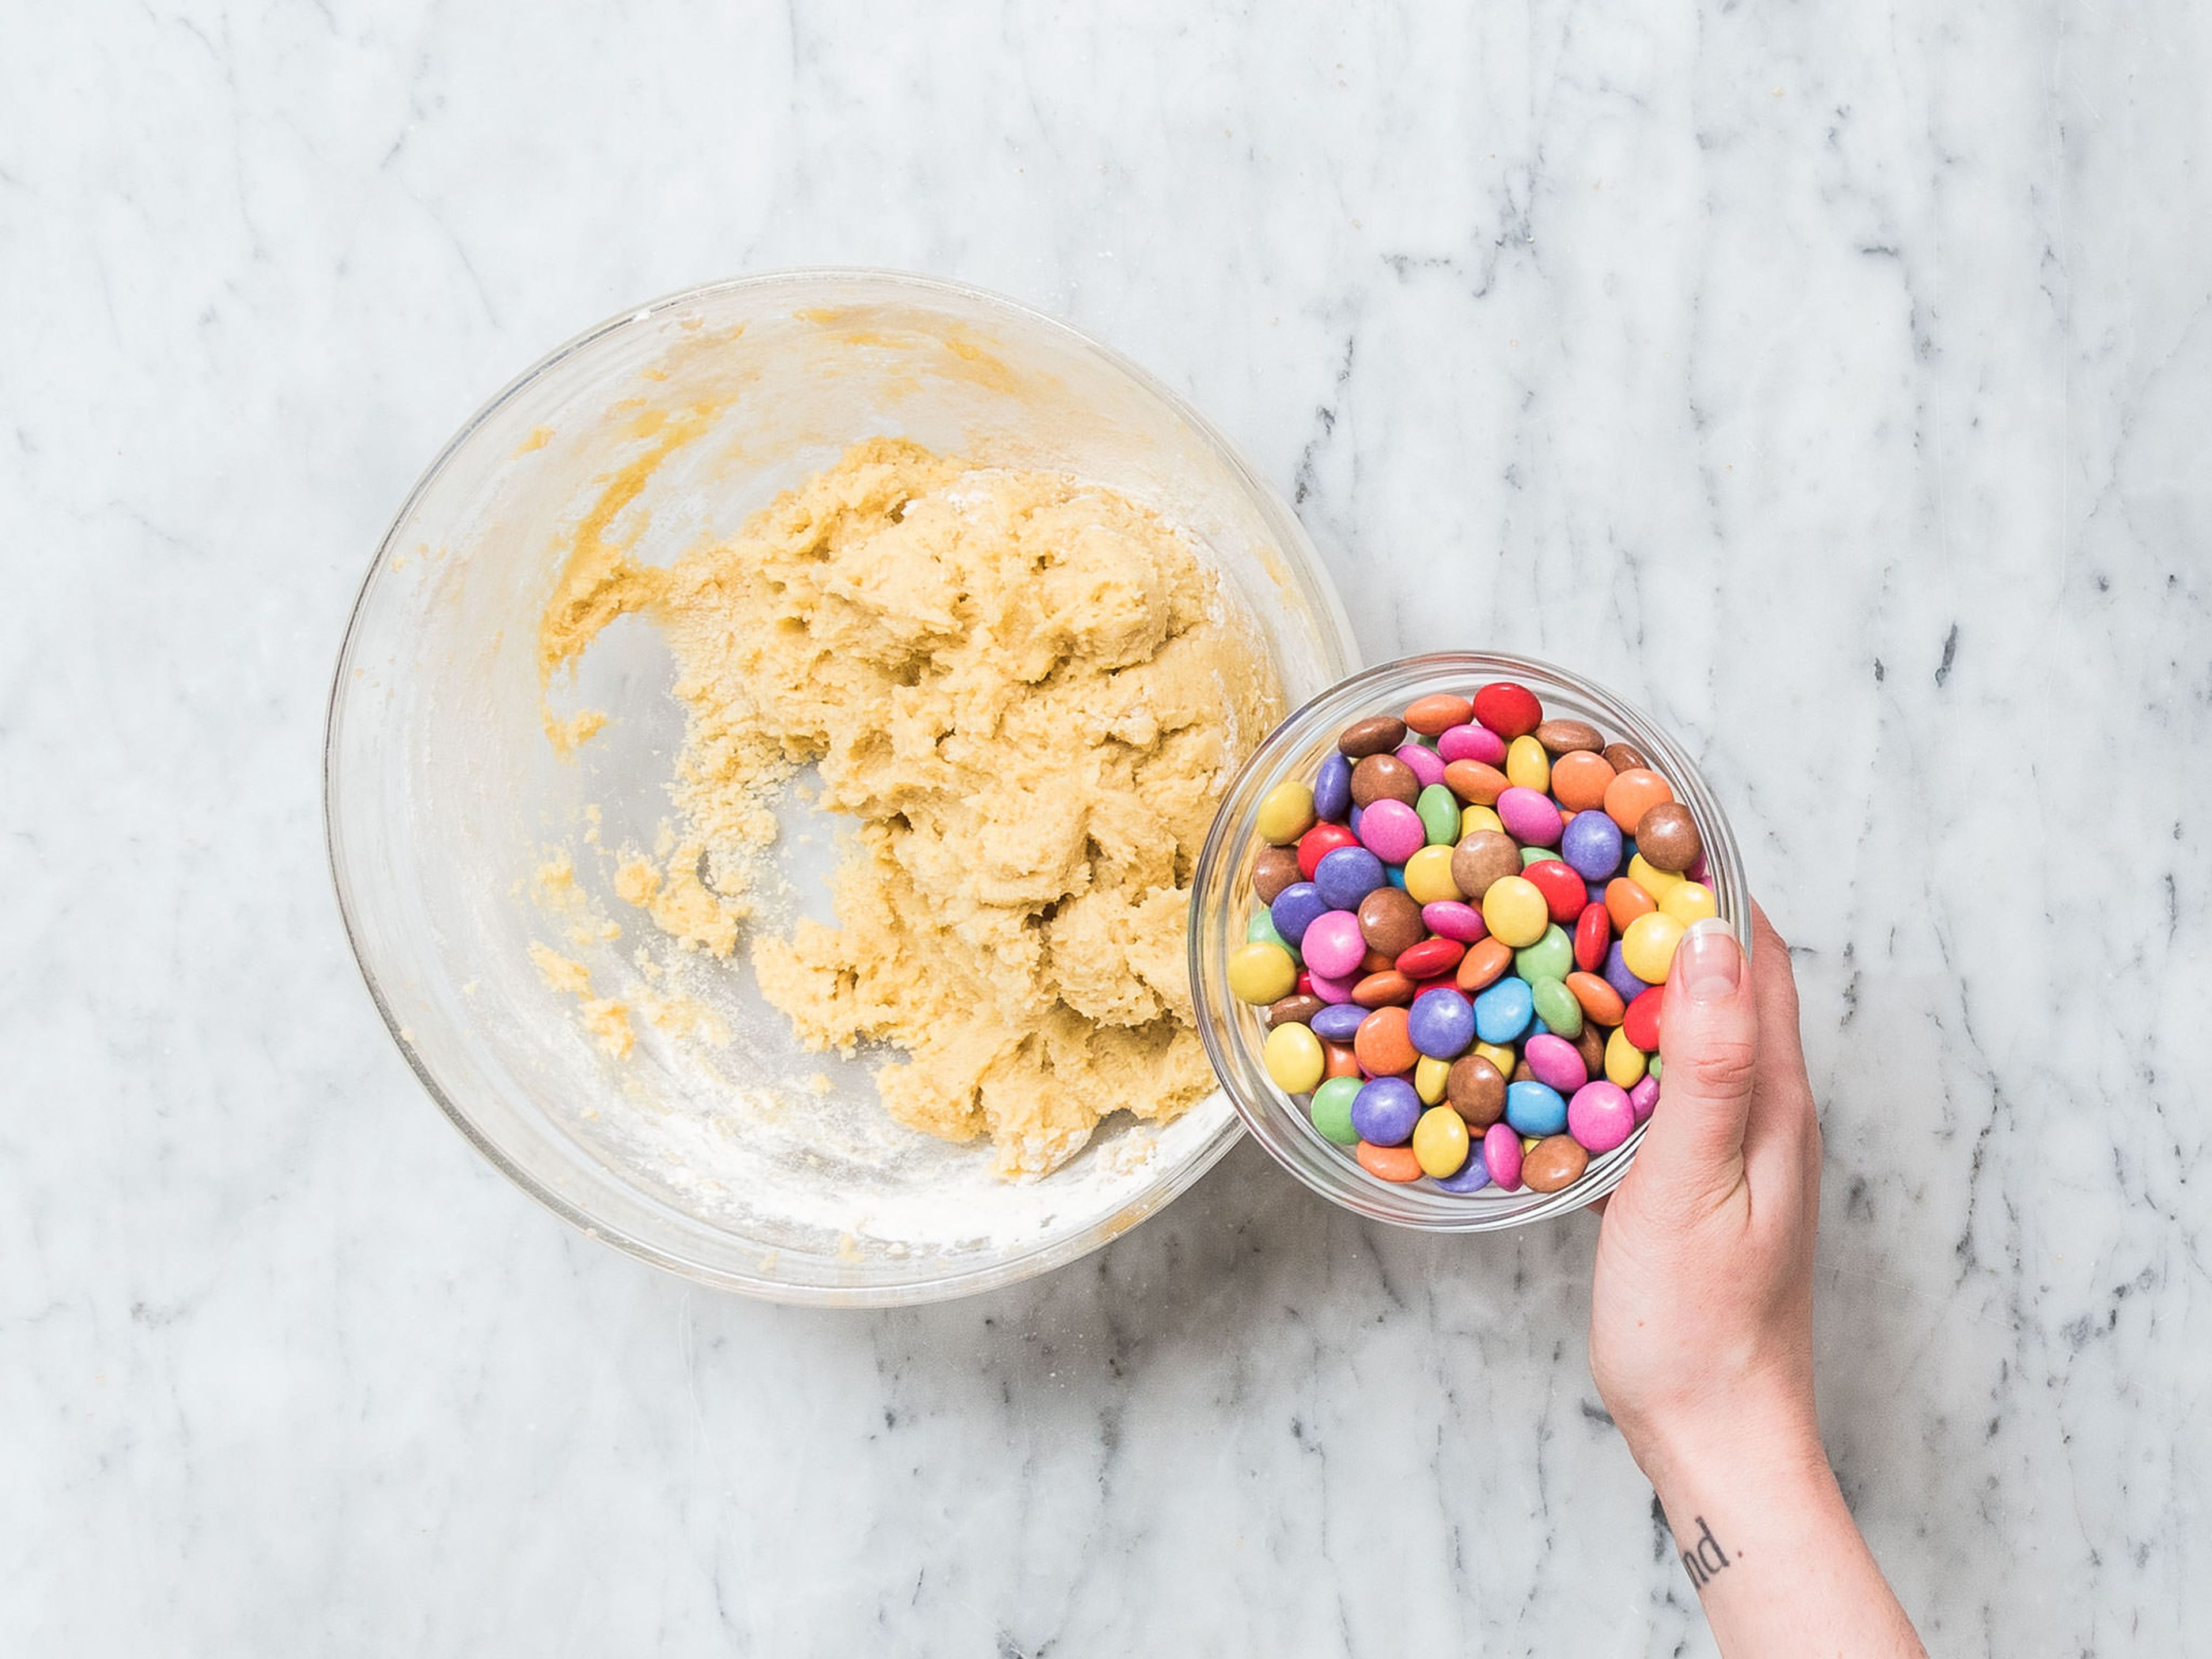 Stir flour mixture into butter-egg mixture and mix until well combined. Stir in some M&M’s and chocolate chips.